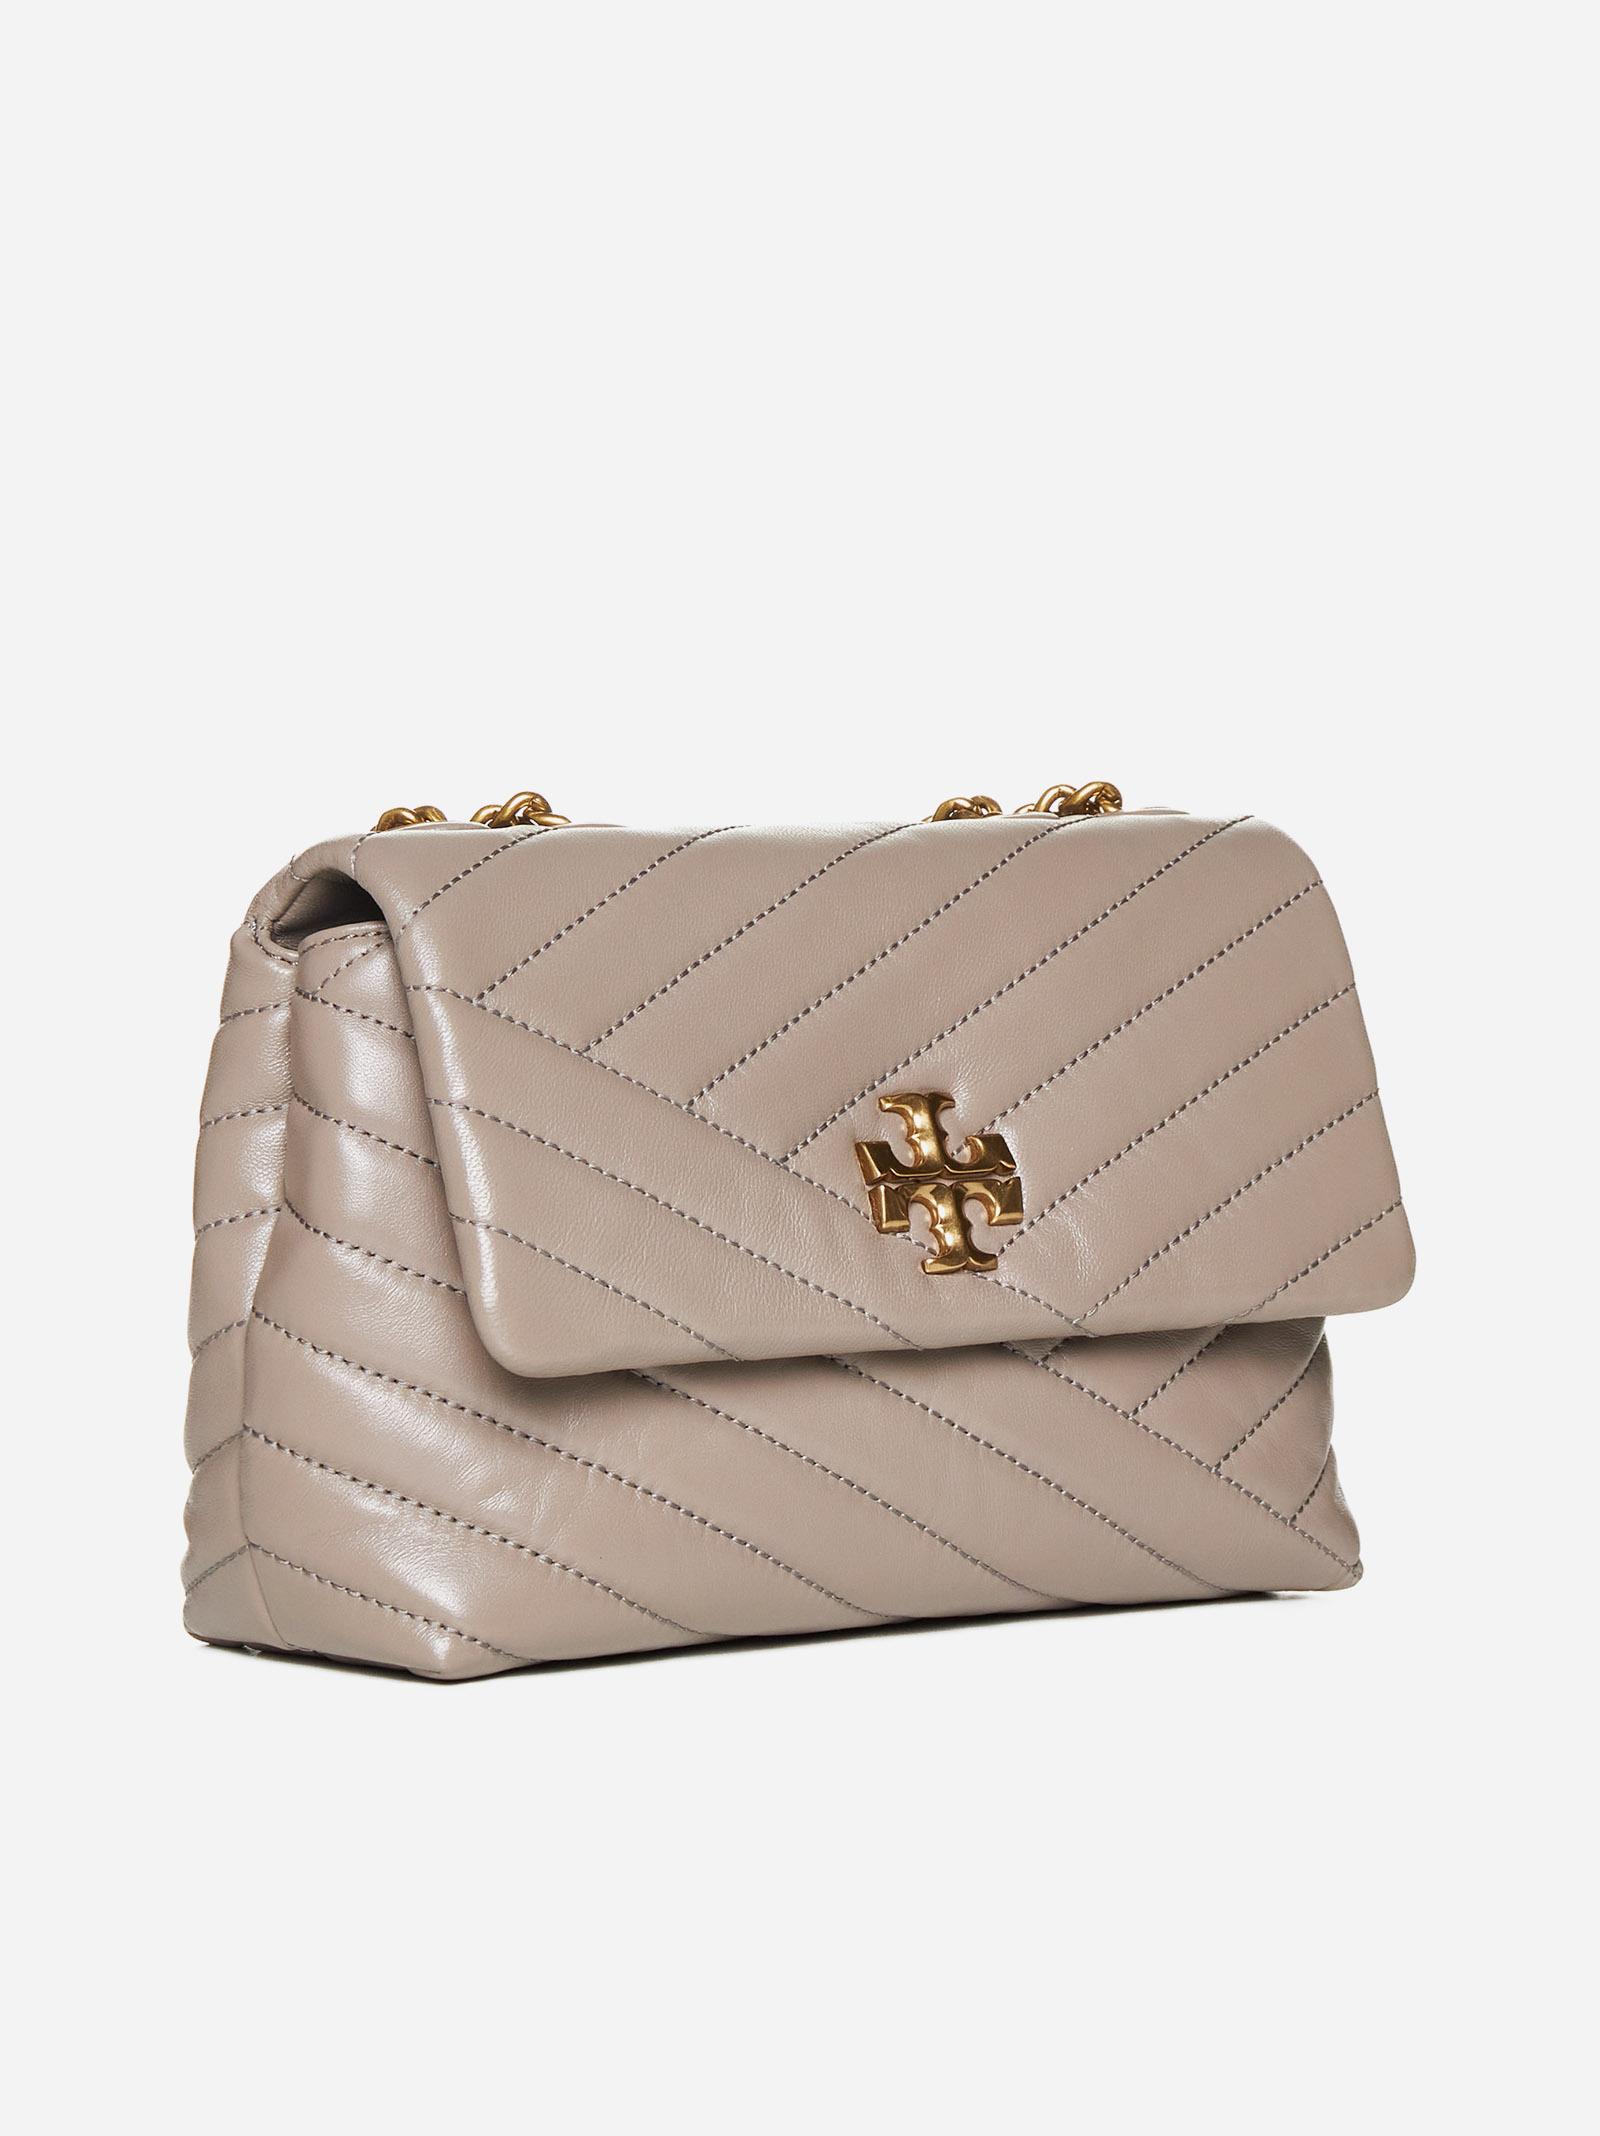 Tory Burch Kira Convertible Chevron Leather Small Bag in Natural